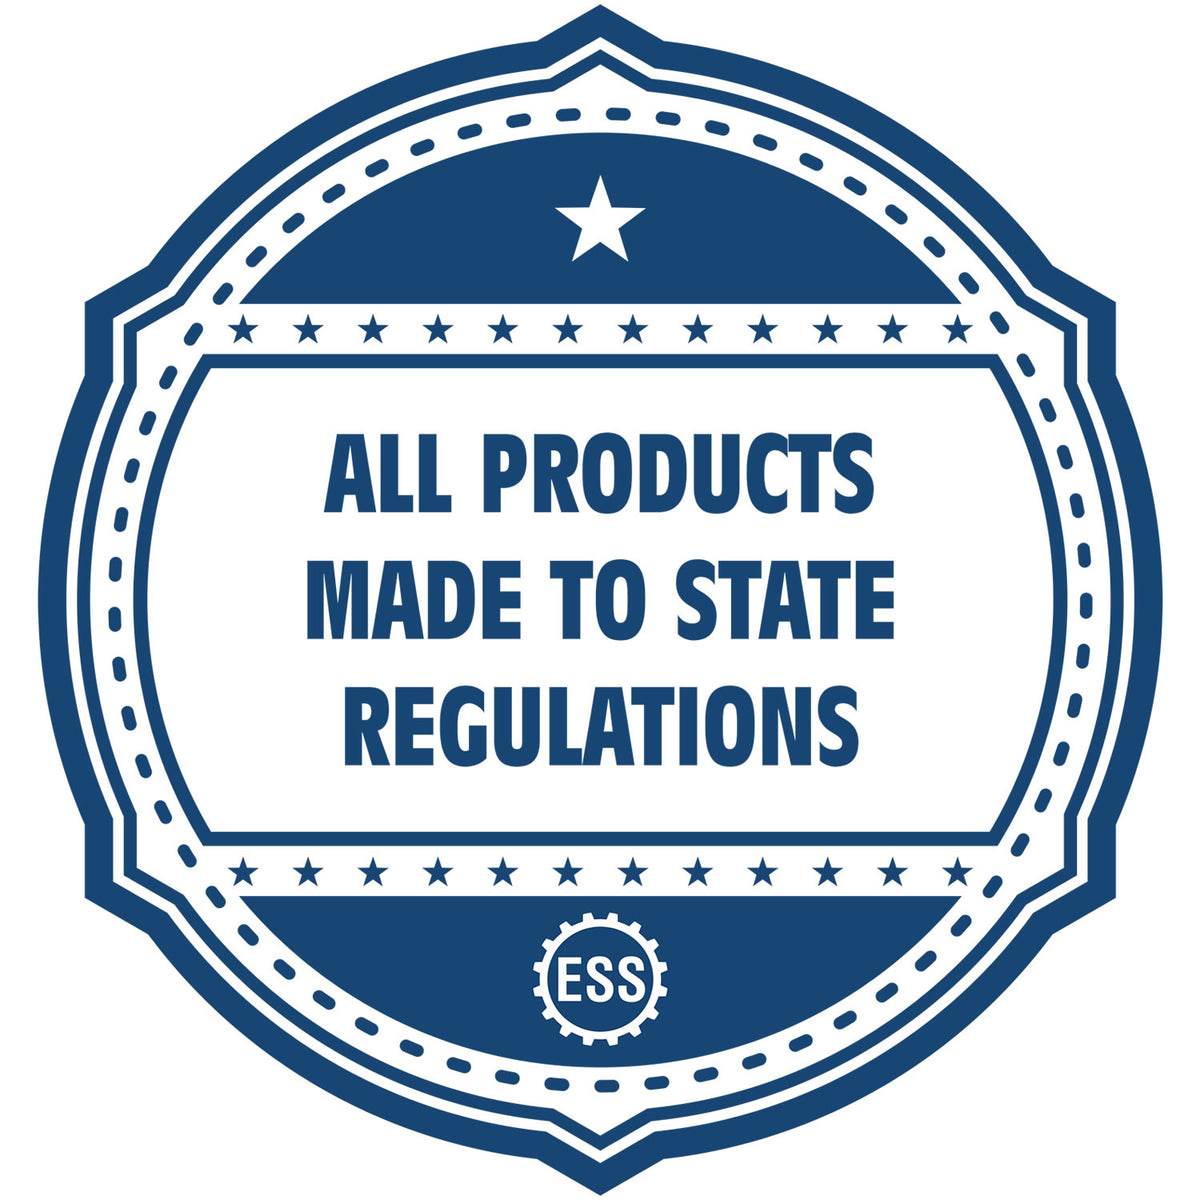 An icon or badge element for the PSI Alabama Notary Stamp showing that this product is made in compliance with state regulations.